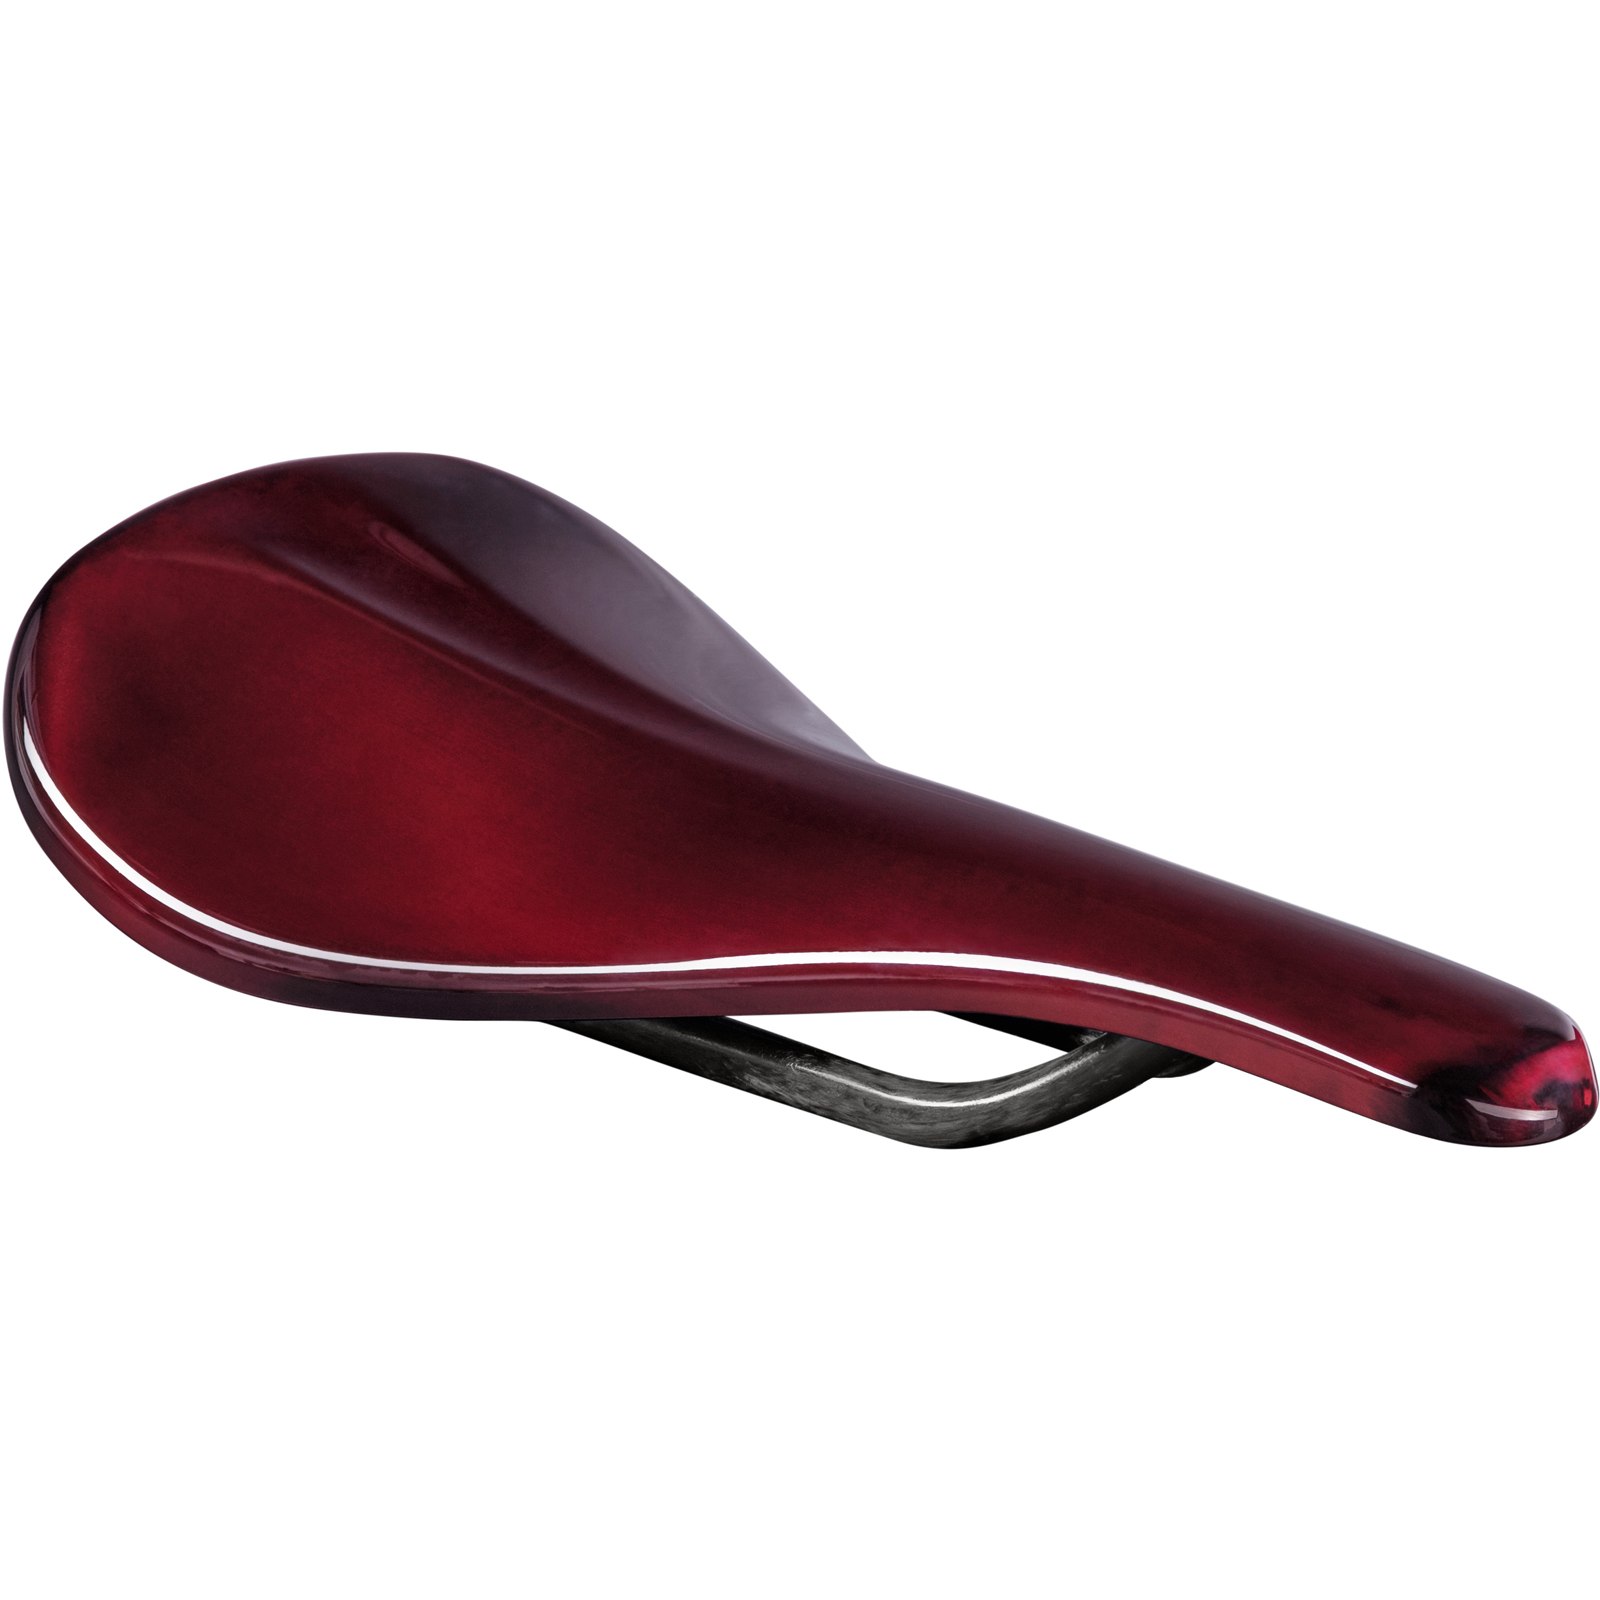 Picture of Beast Components Pure Carbon Saddle - 130mm, UD red